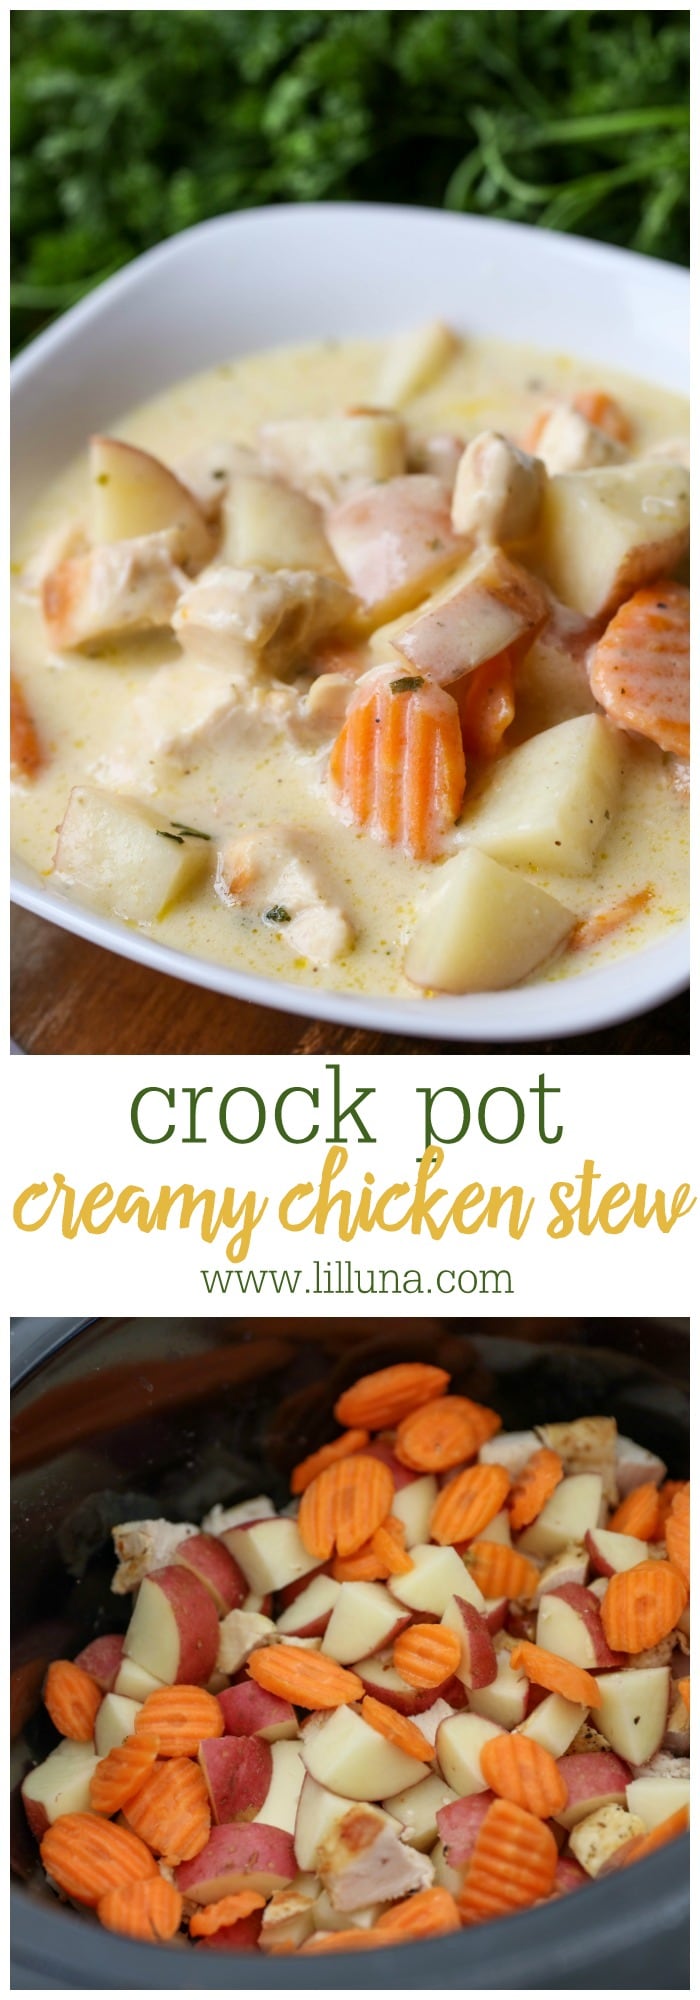 What is a simple recipe for Crock-Pot chicken stew?